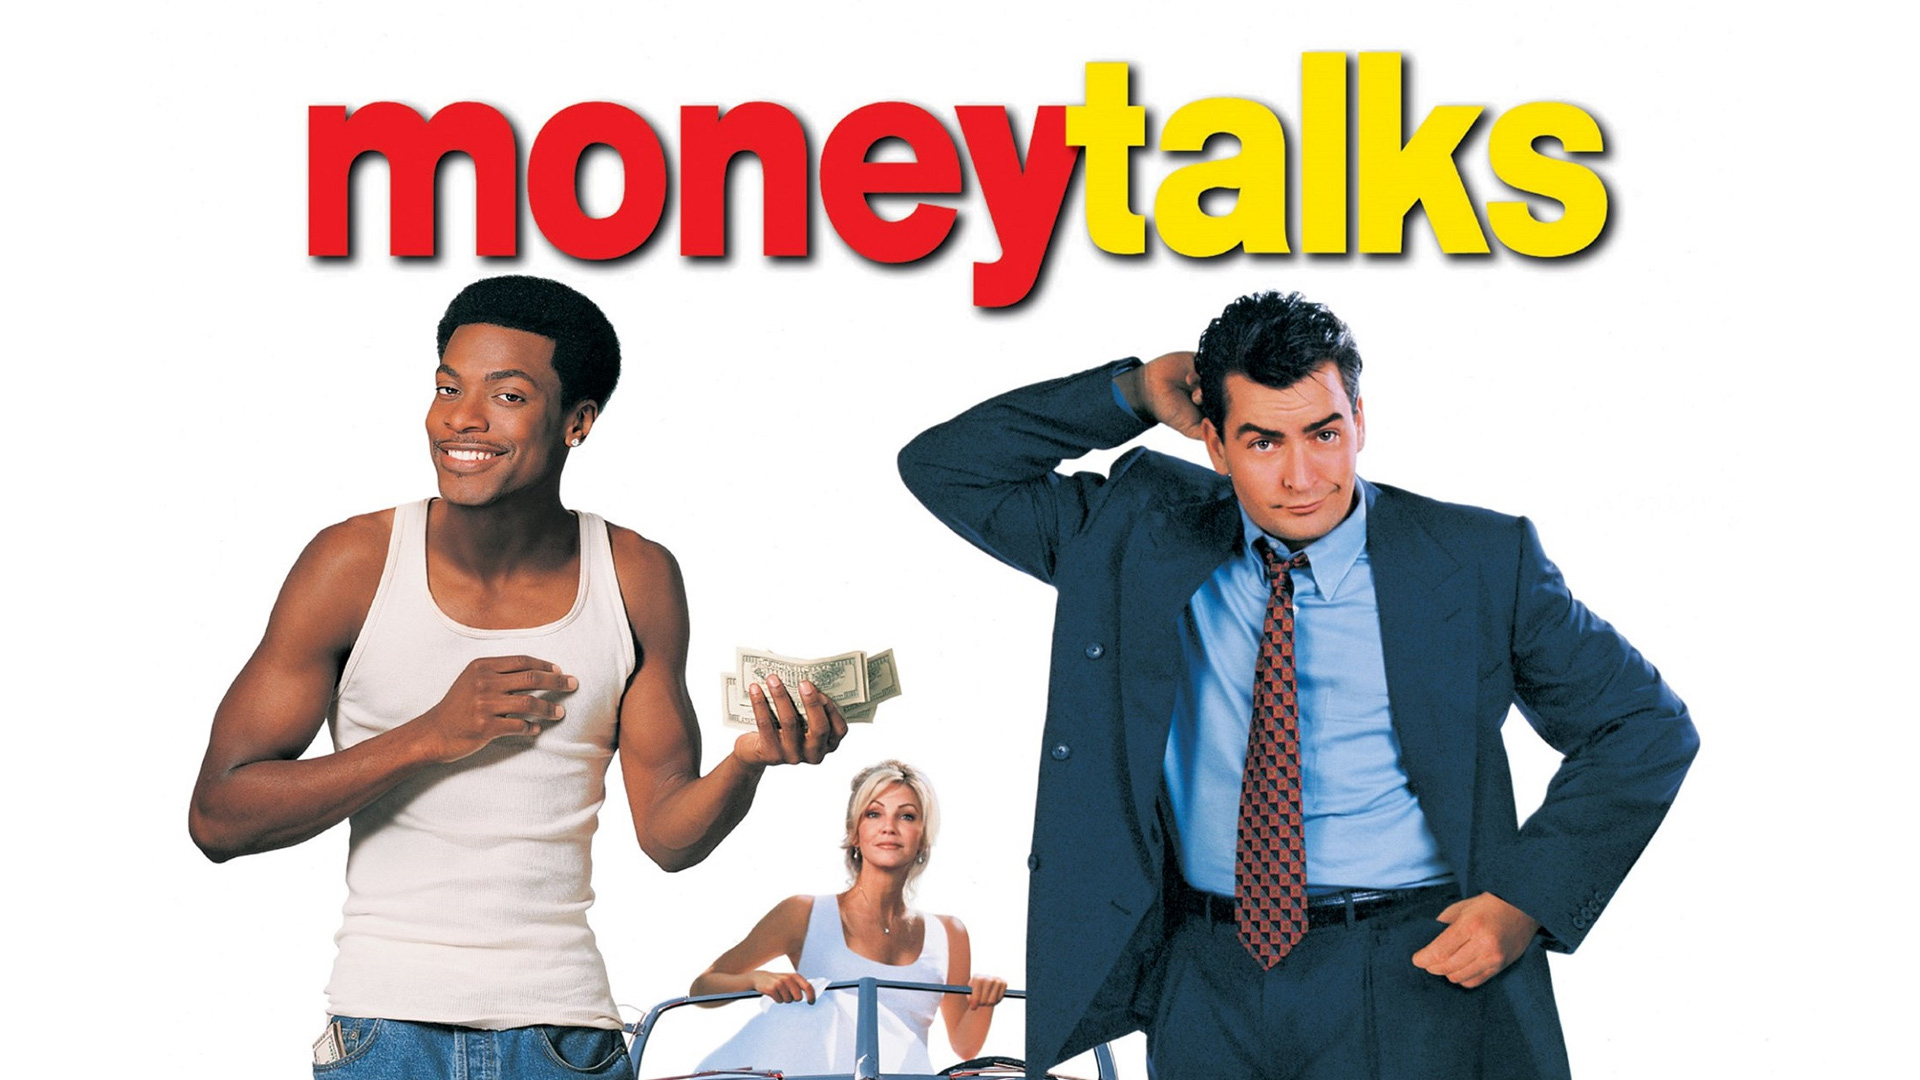 Chris Tucker, Heather Locklear, and Charlie Sheen in promo art for Money Talks.